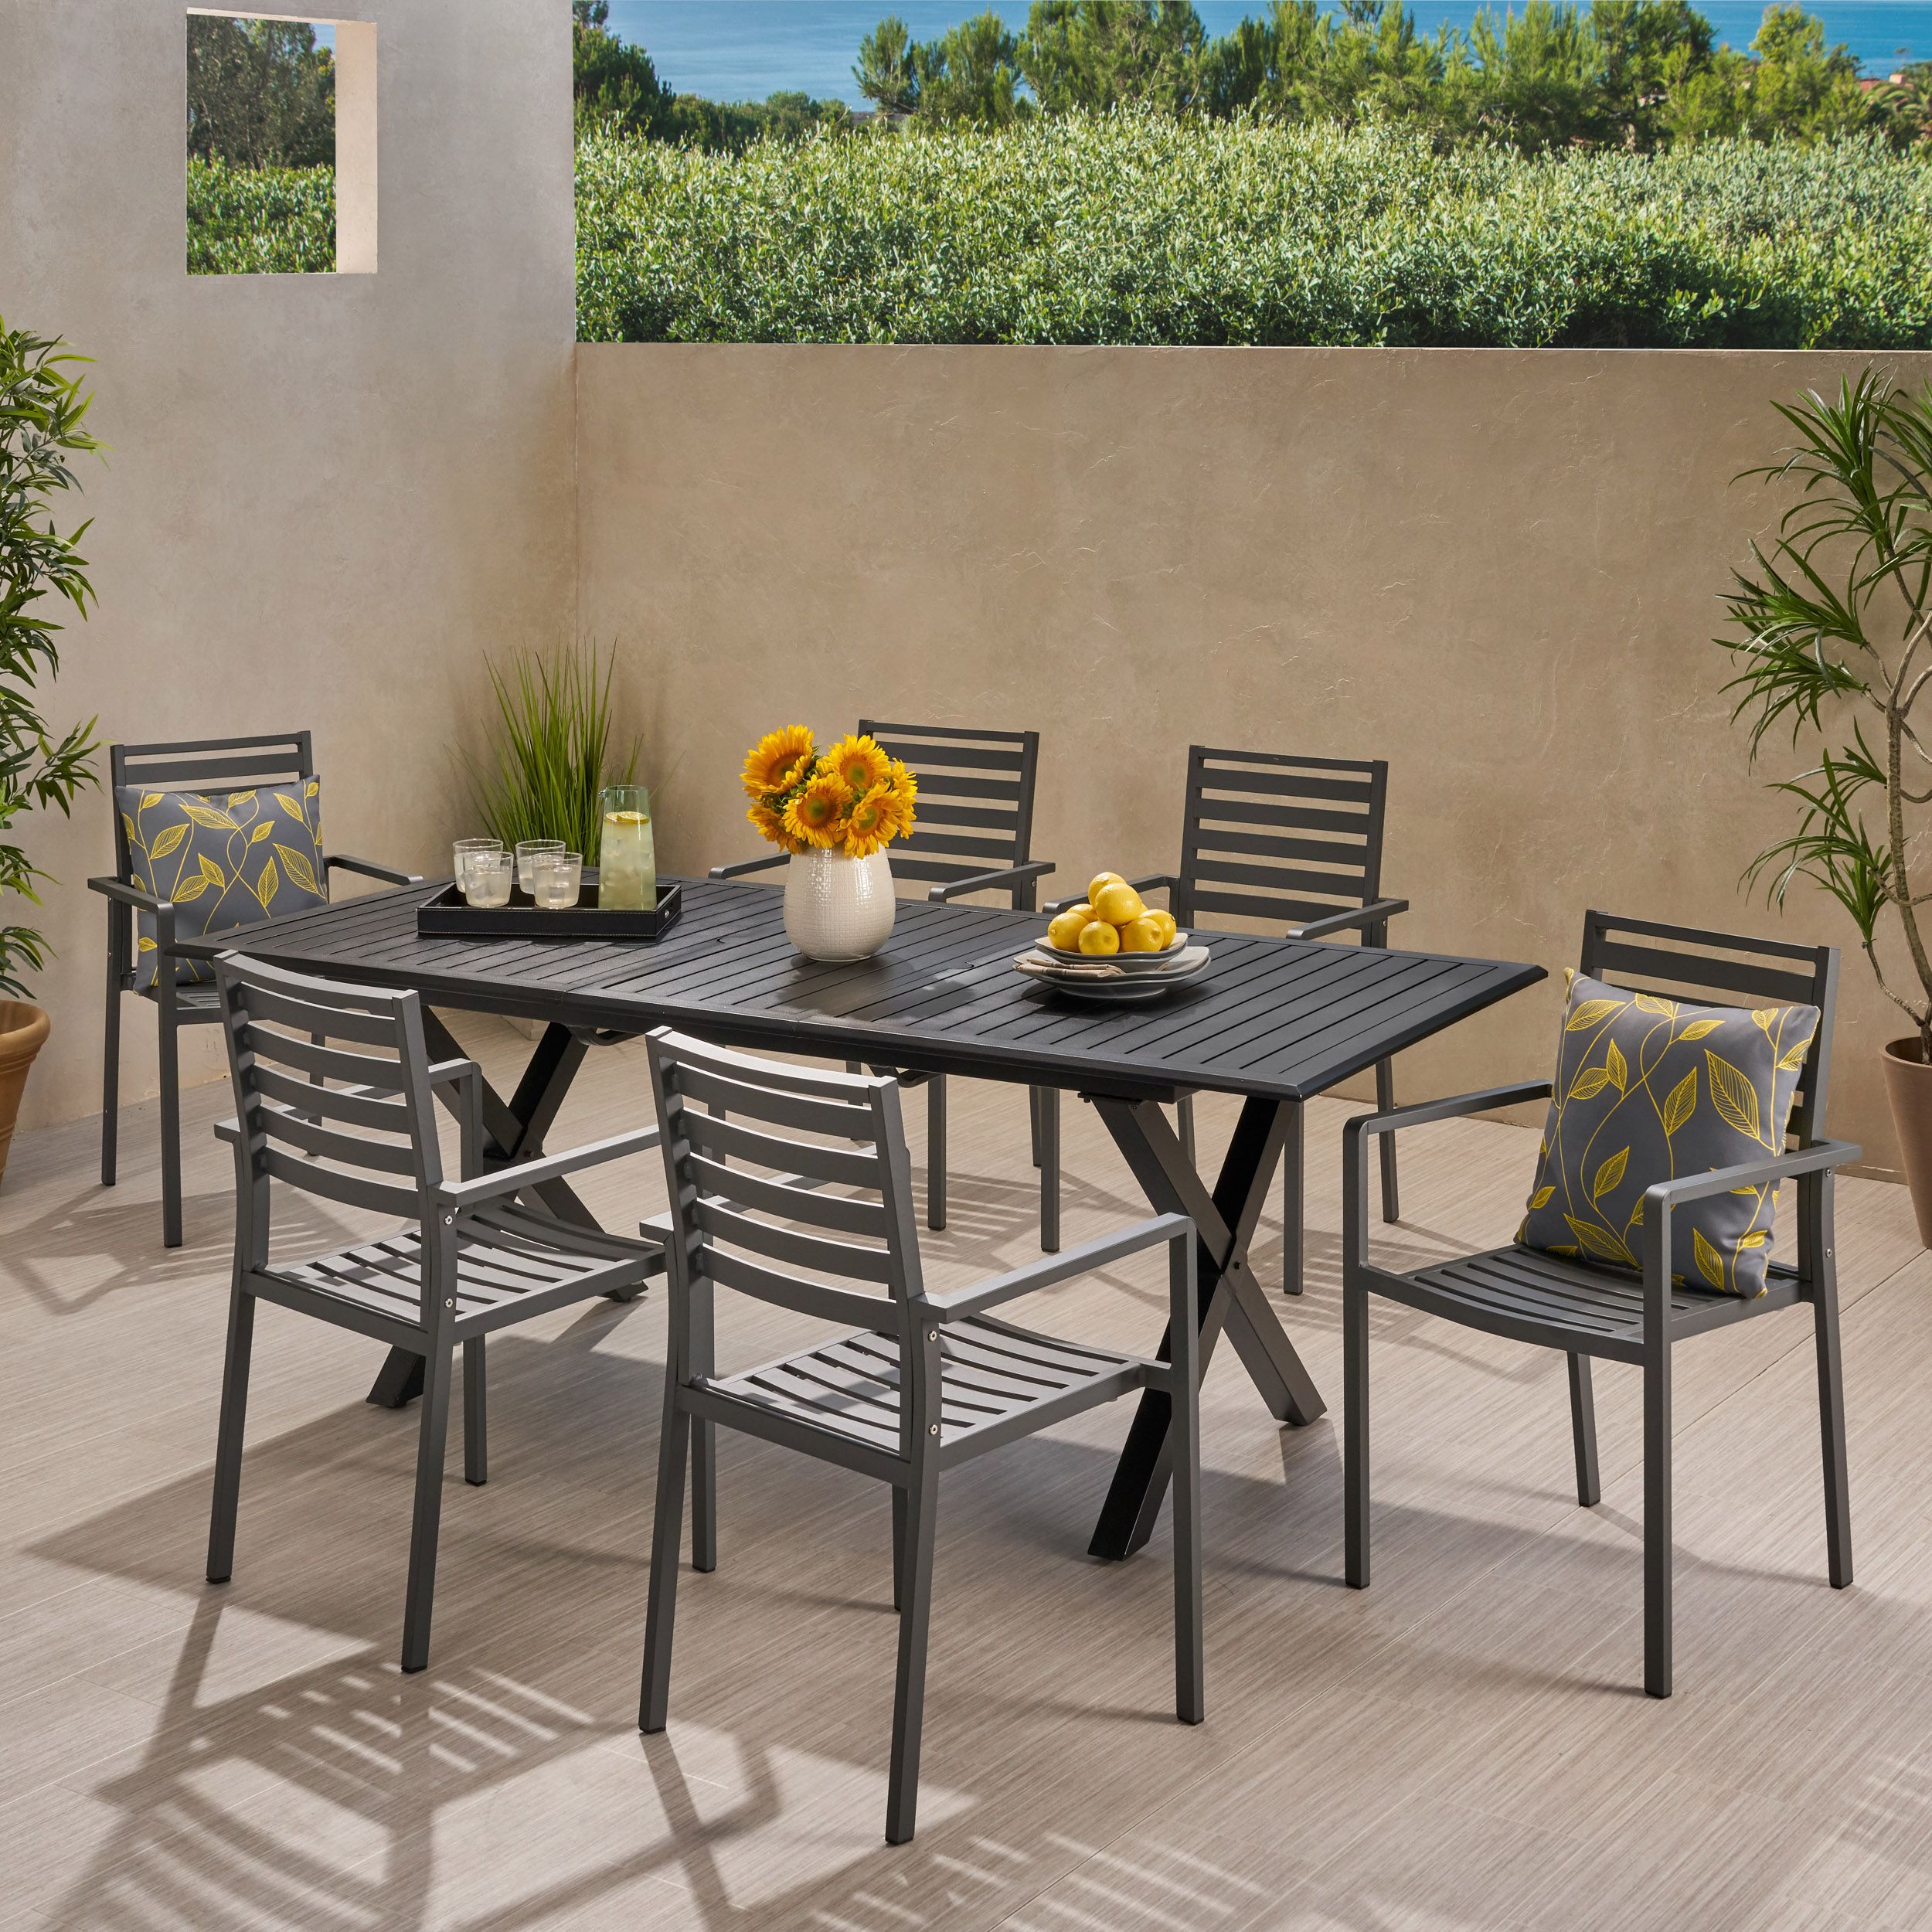 Noxx Outdoor Modern 6 Seater Aluminum Dining Set With Expandable Table Intended For Black Outdoor Modern Chairs Sets (View 5 of 15)